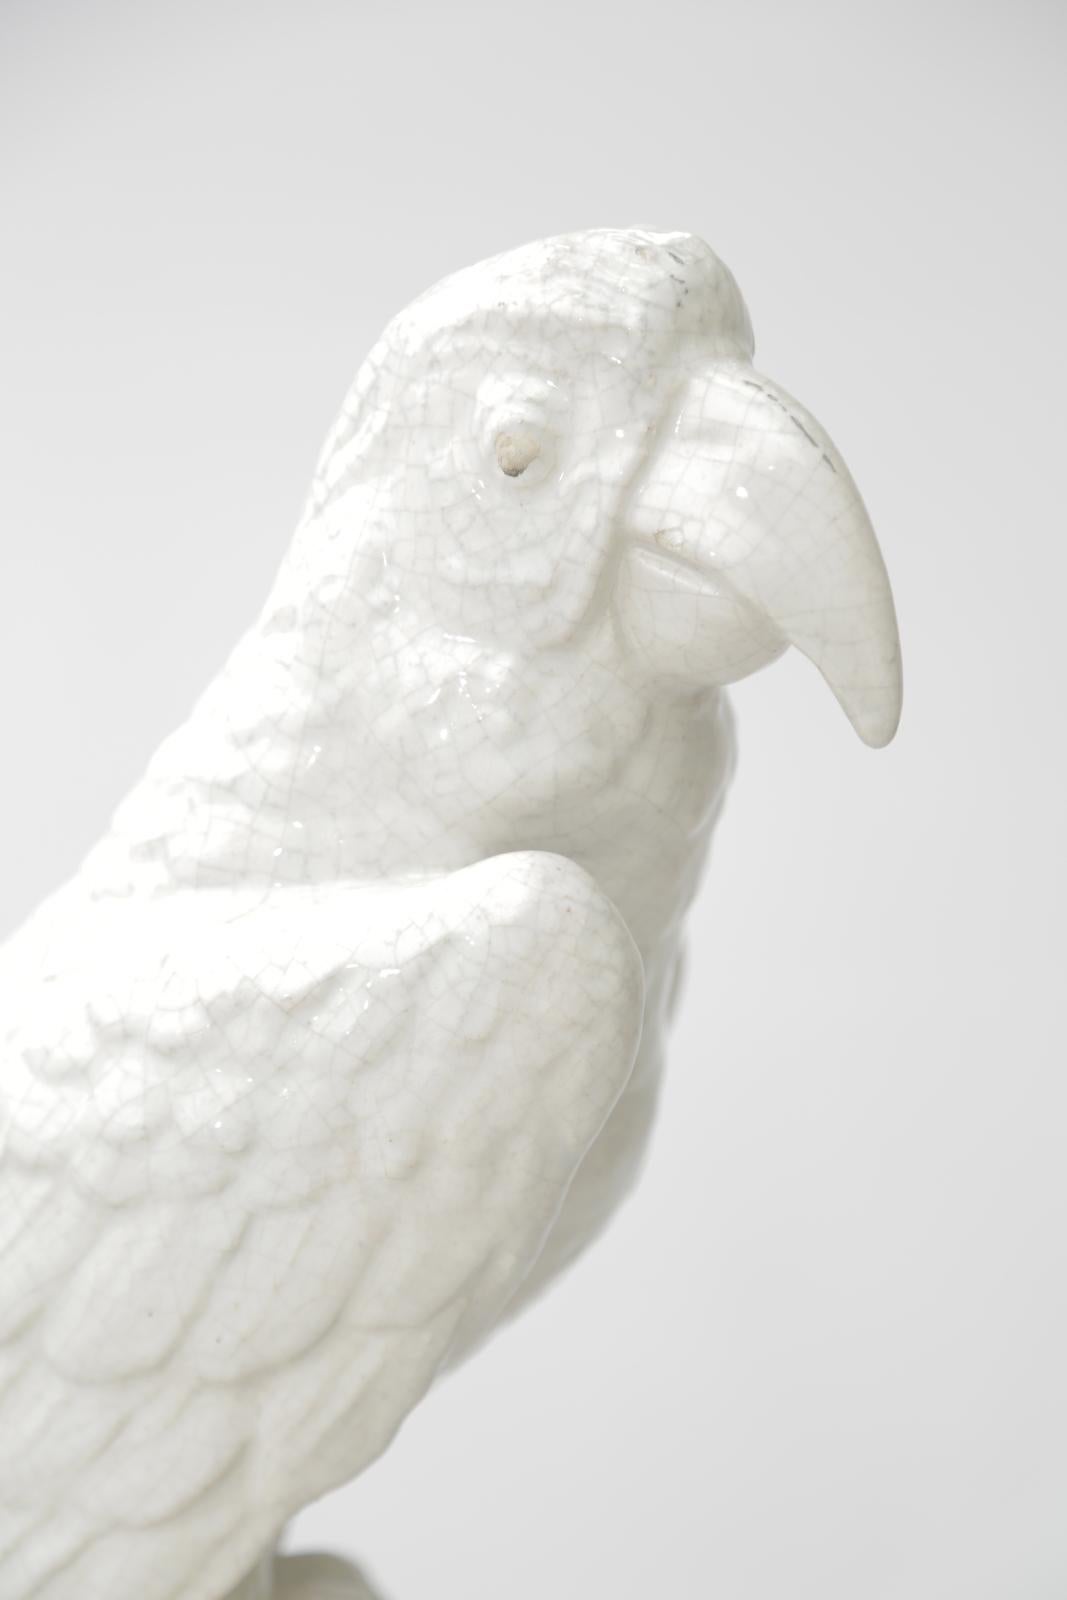 A well-articulated pottery sculpture of a parrot perched upon a tree branch, the body of the parrot is cast in glazed porcelain, while the bottom remains bisque. raised on a ceramic plinth. 

Stock ID: D3231.